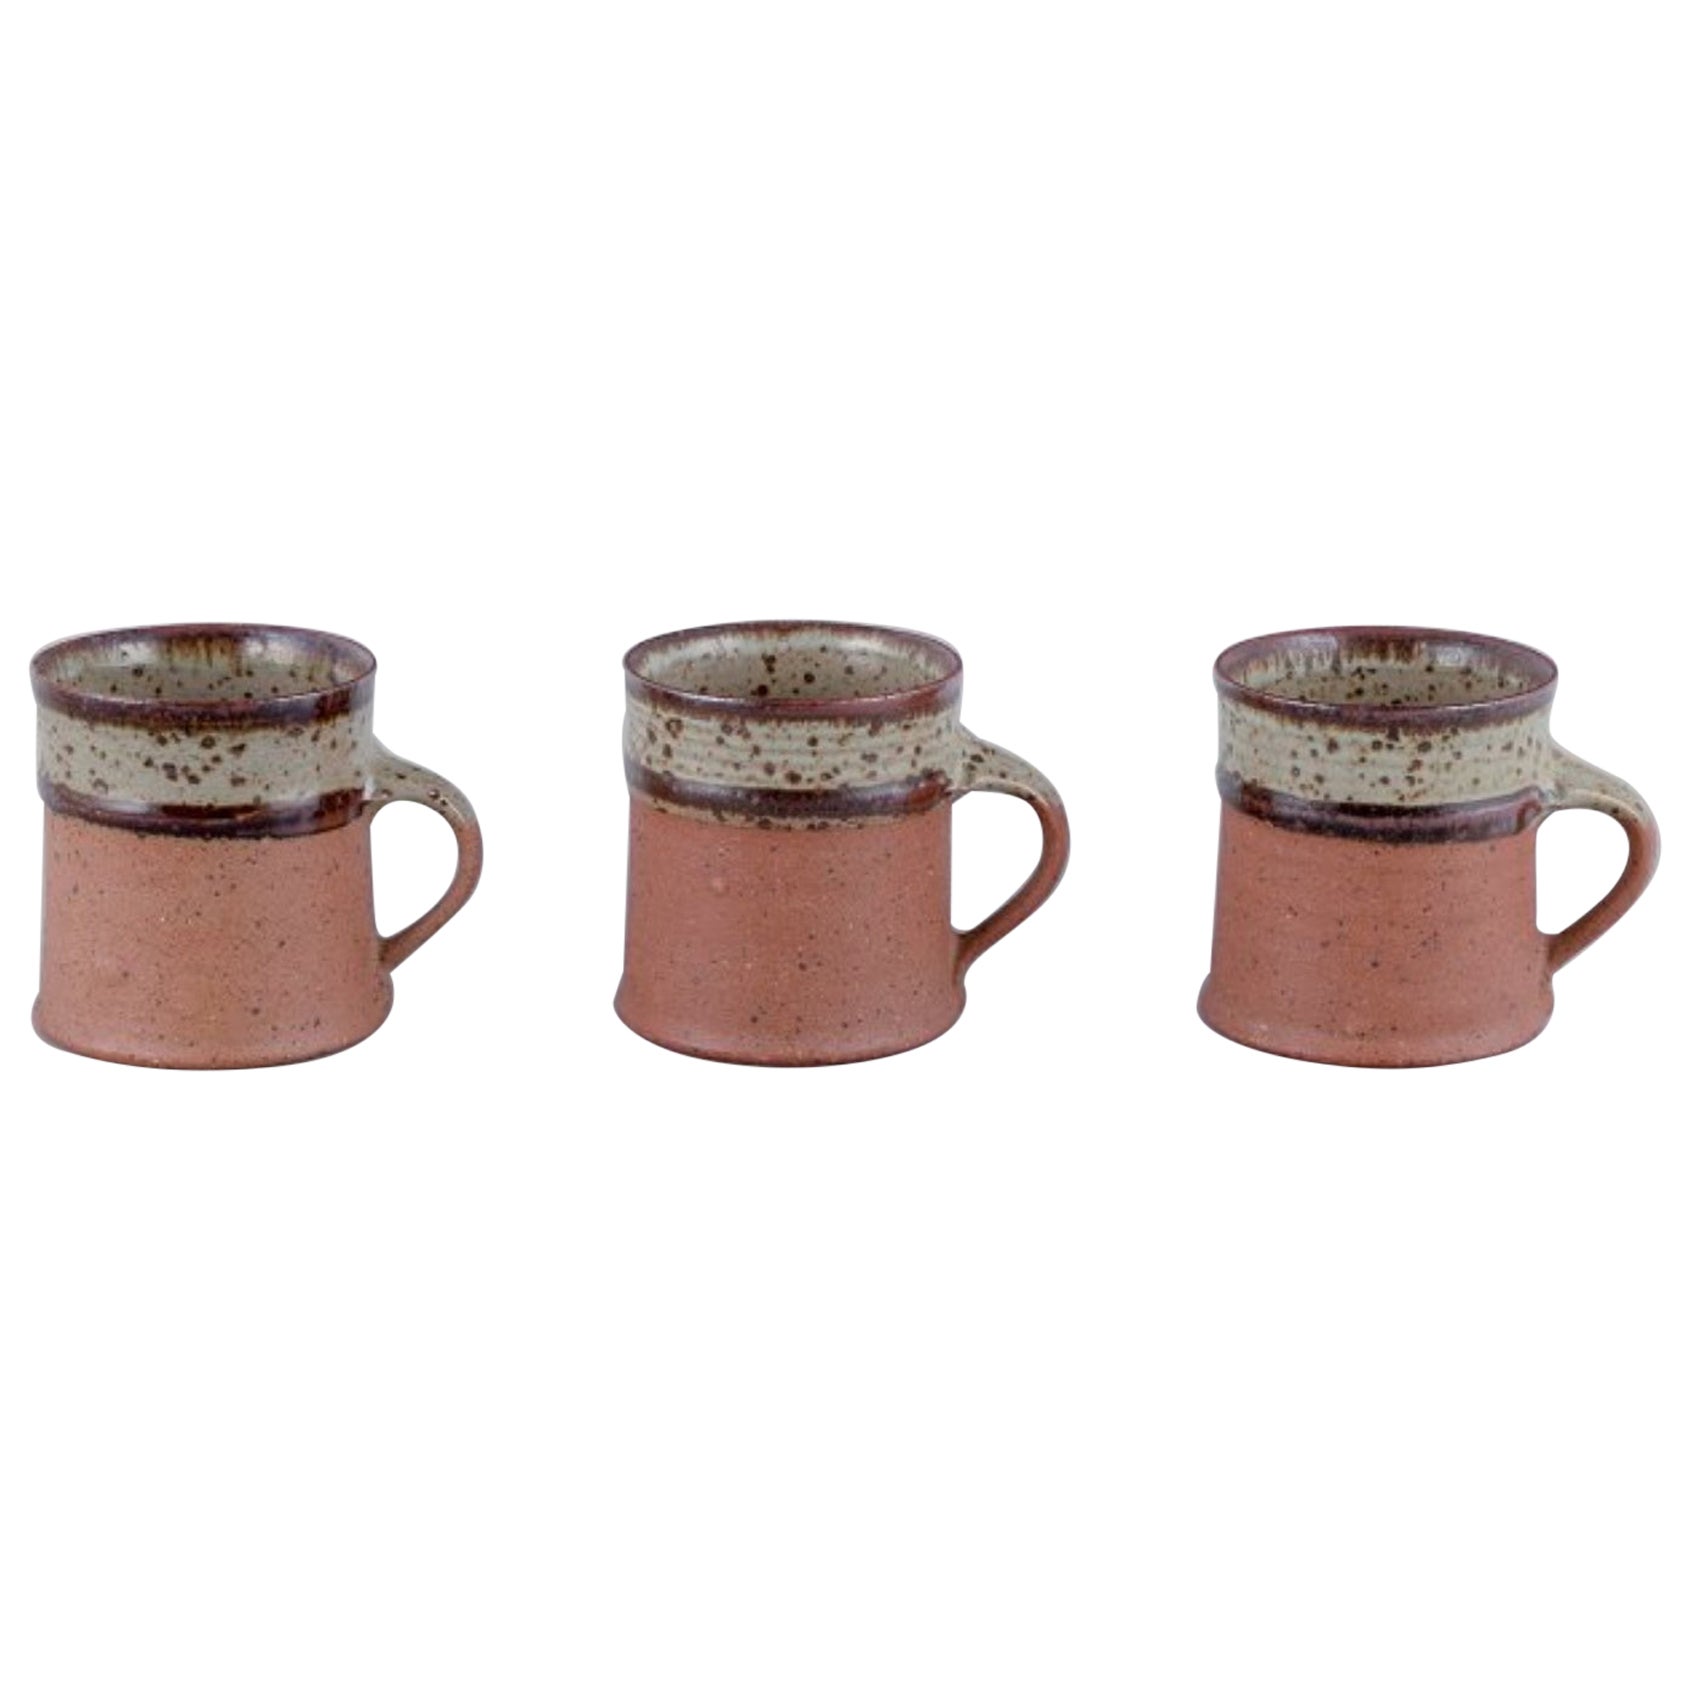 Nysted Ceramics, Denmark. Three ceramic cups in brown shades. For Sale